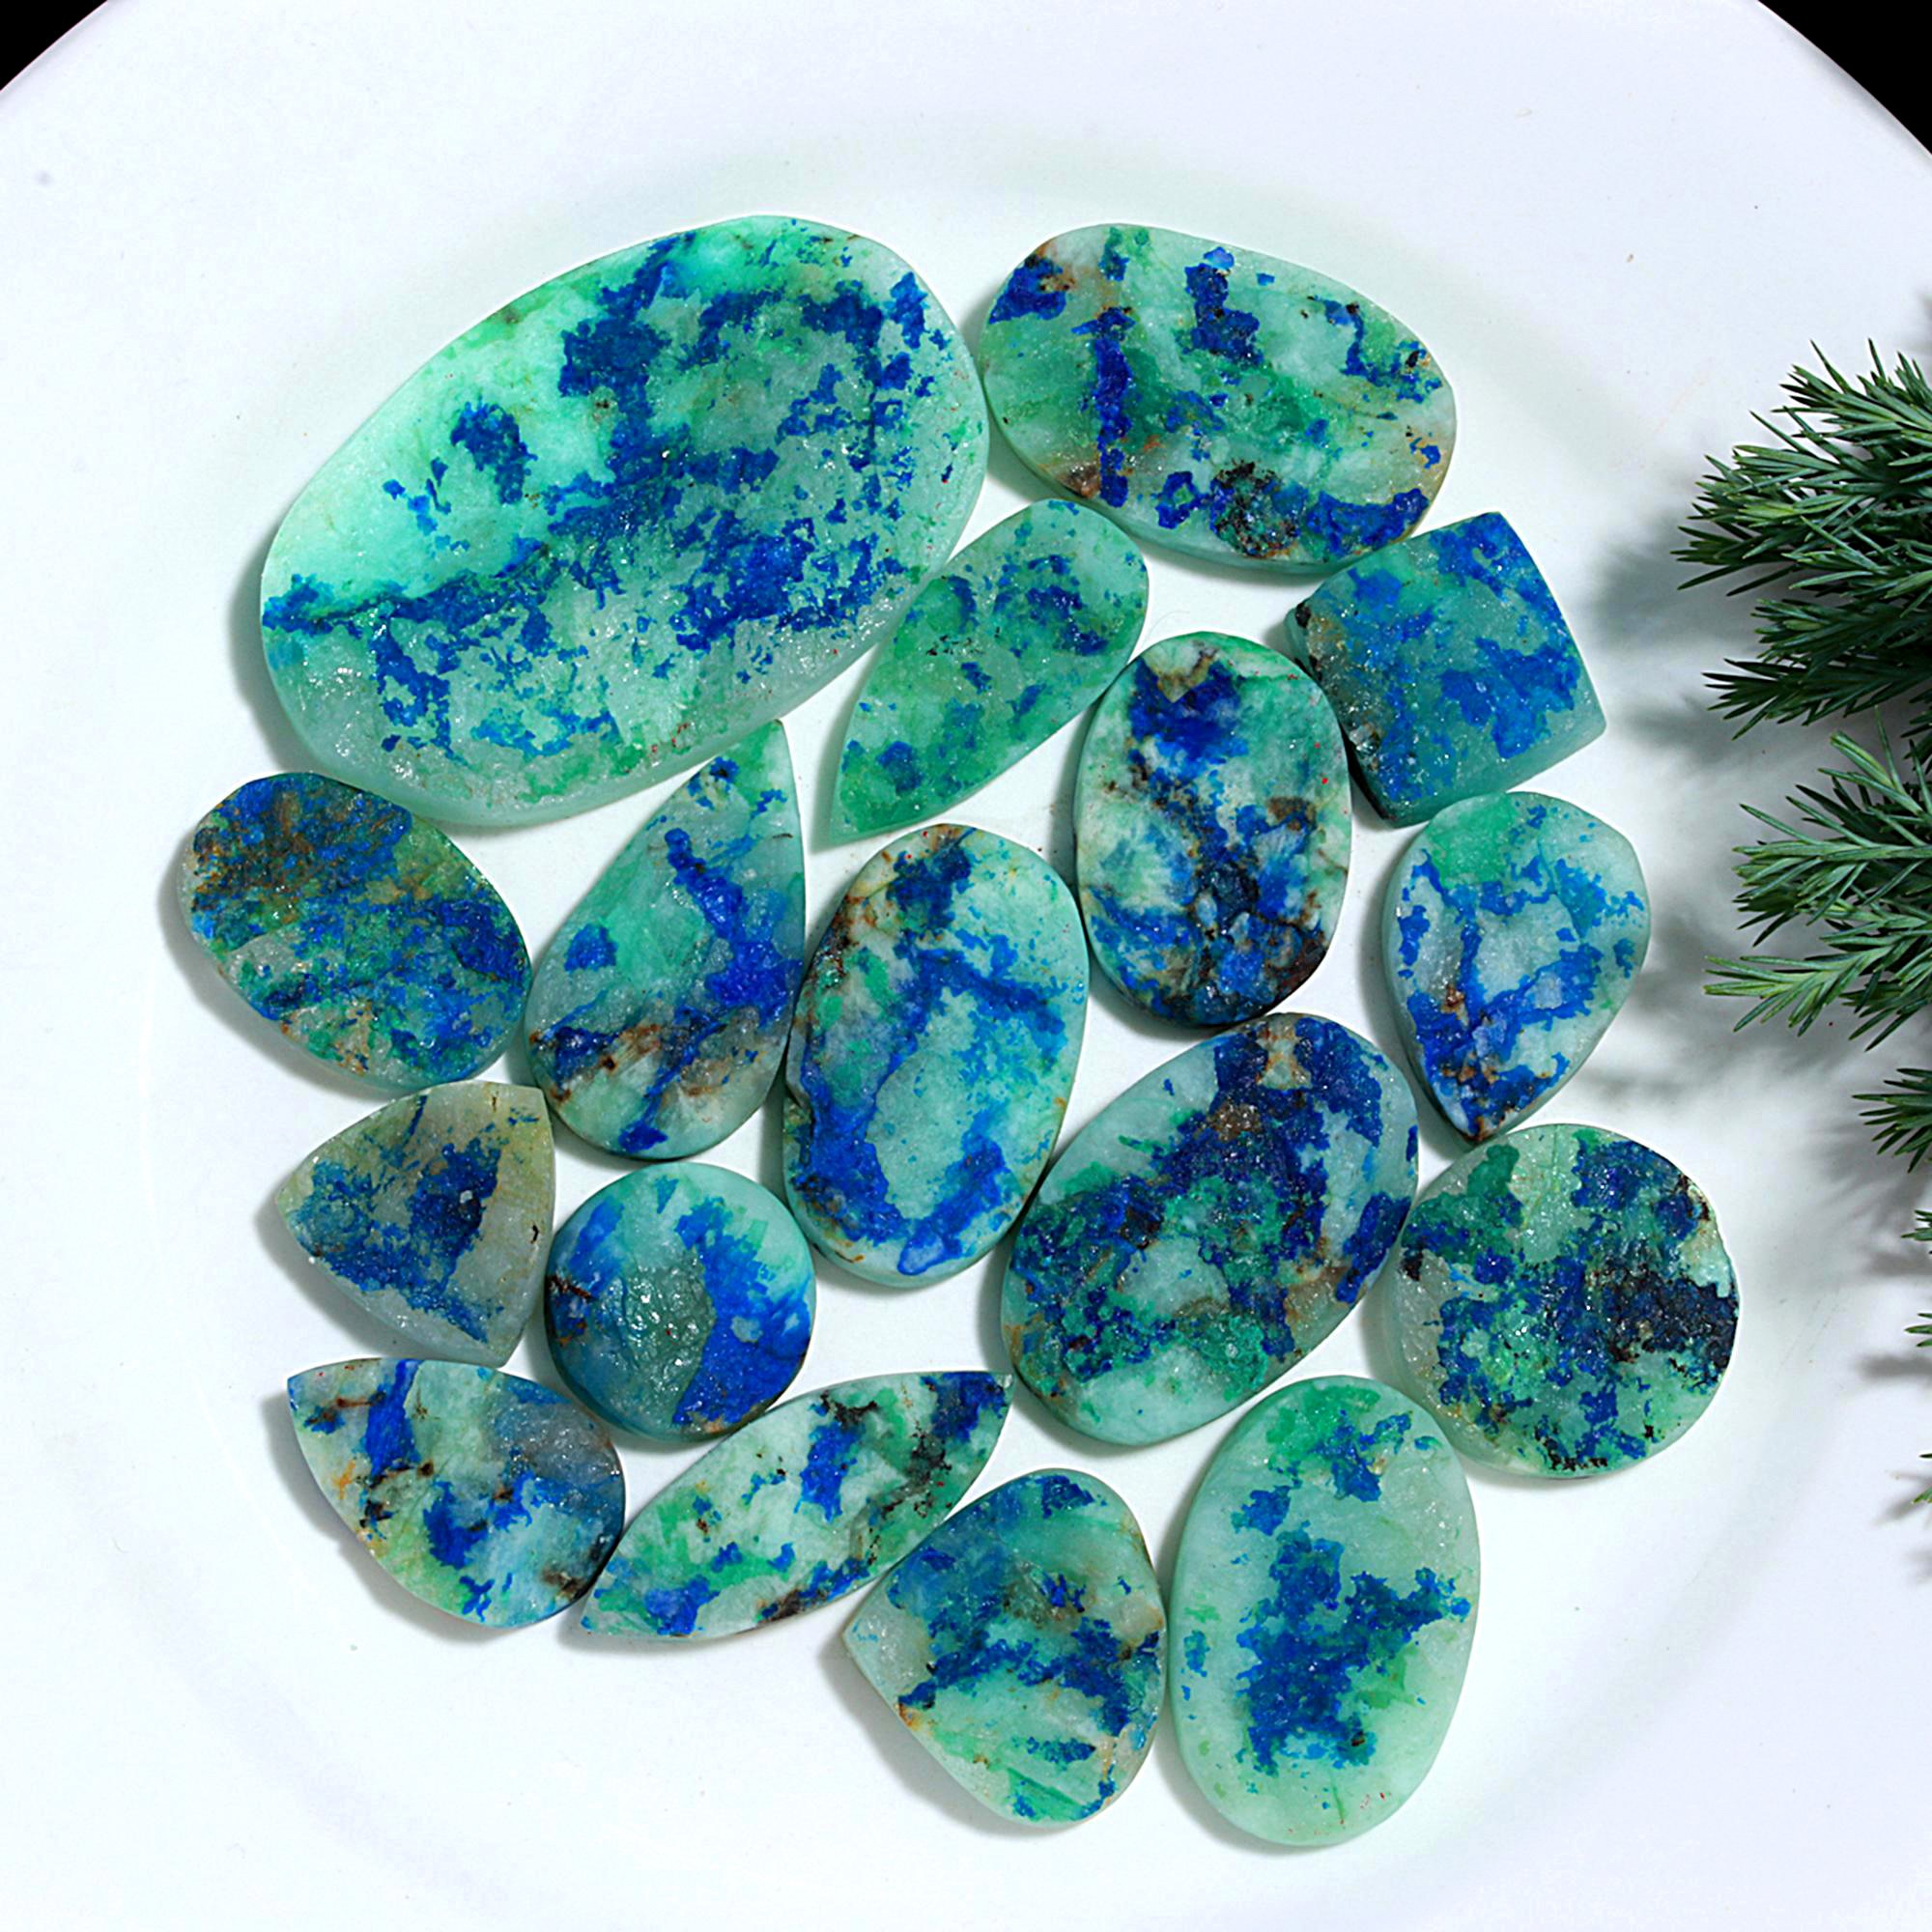 17 Pcs 580.Cts Natural Azurite Druzy Unpolished Loose Cabochon Gemstone For Jewelry Wholesale Lot Size 53x33 19x20mm#1179